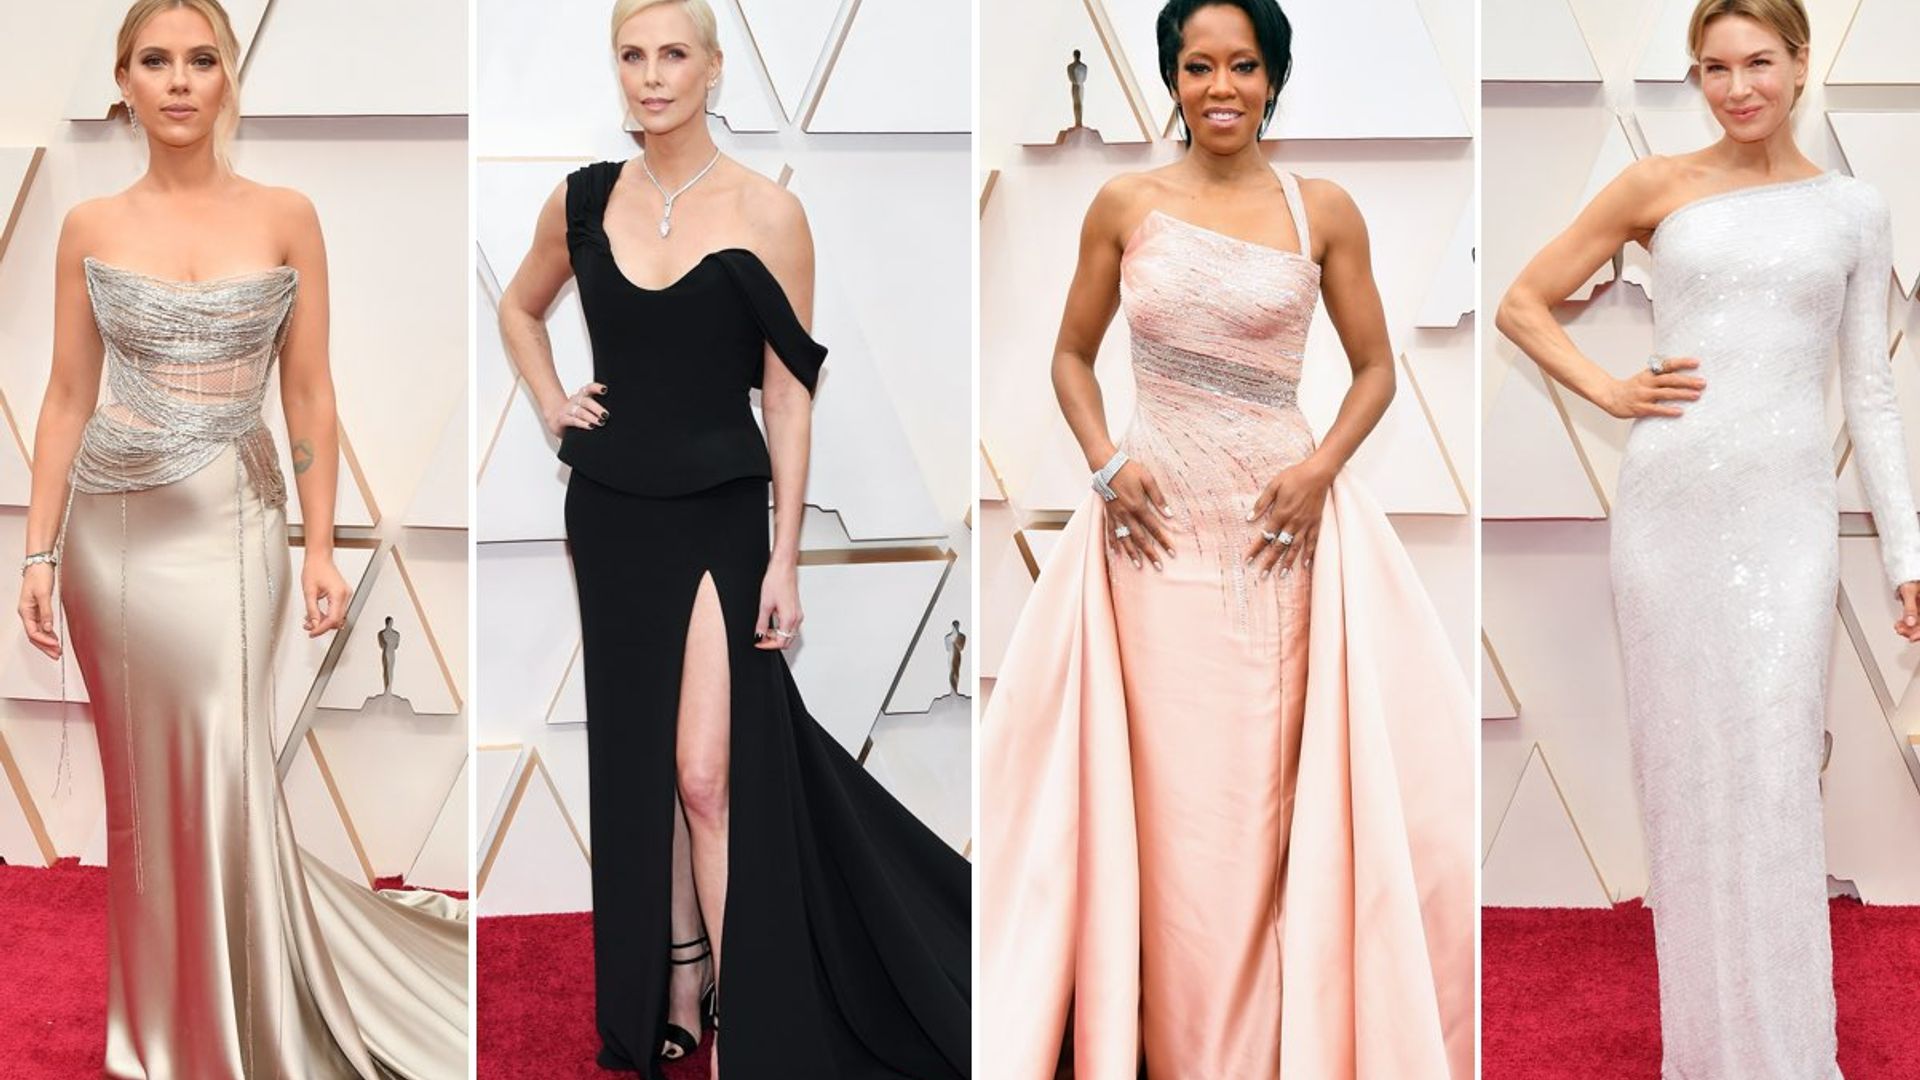 Celebrities prepare to show off their high Fashion on Oscars’ Red Carpet